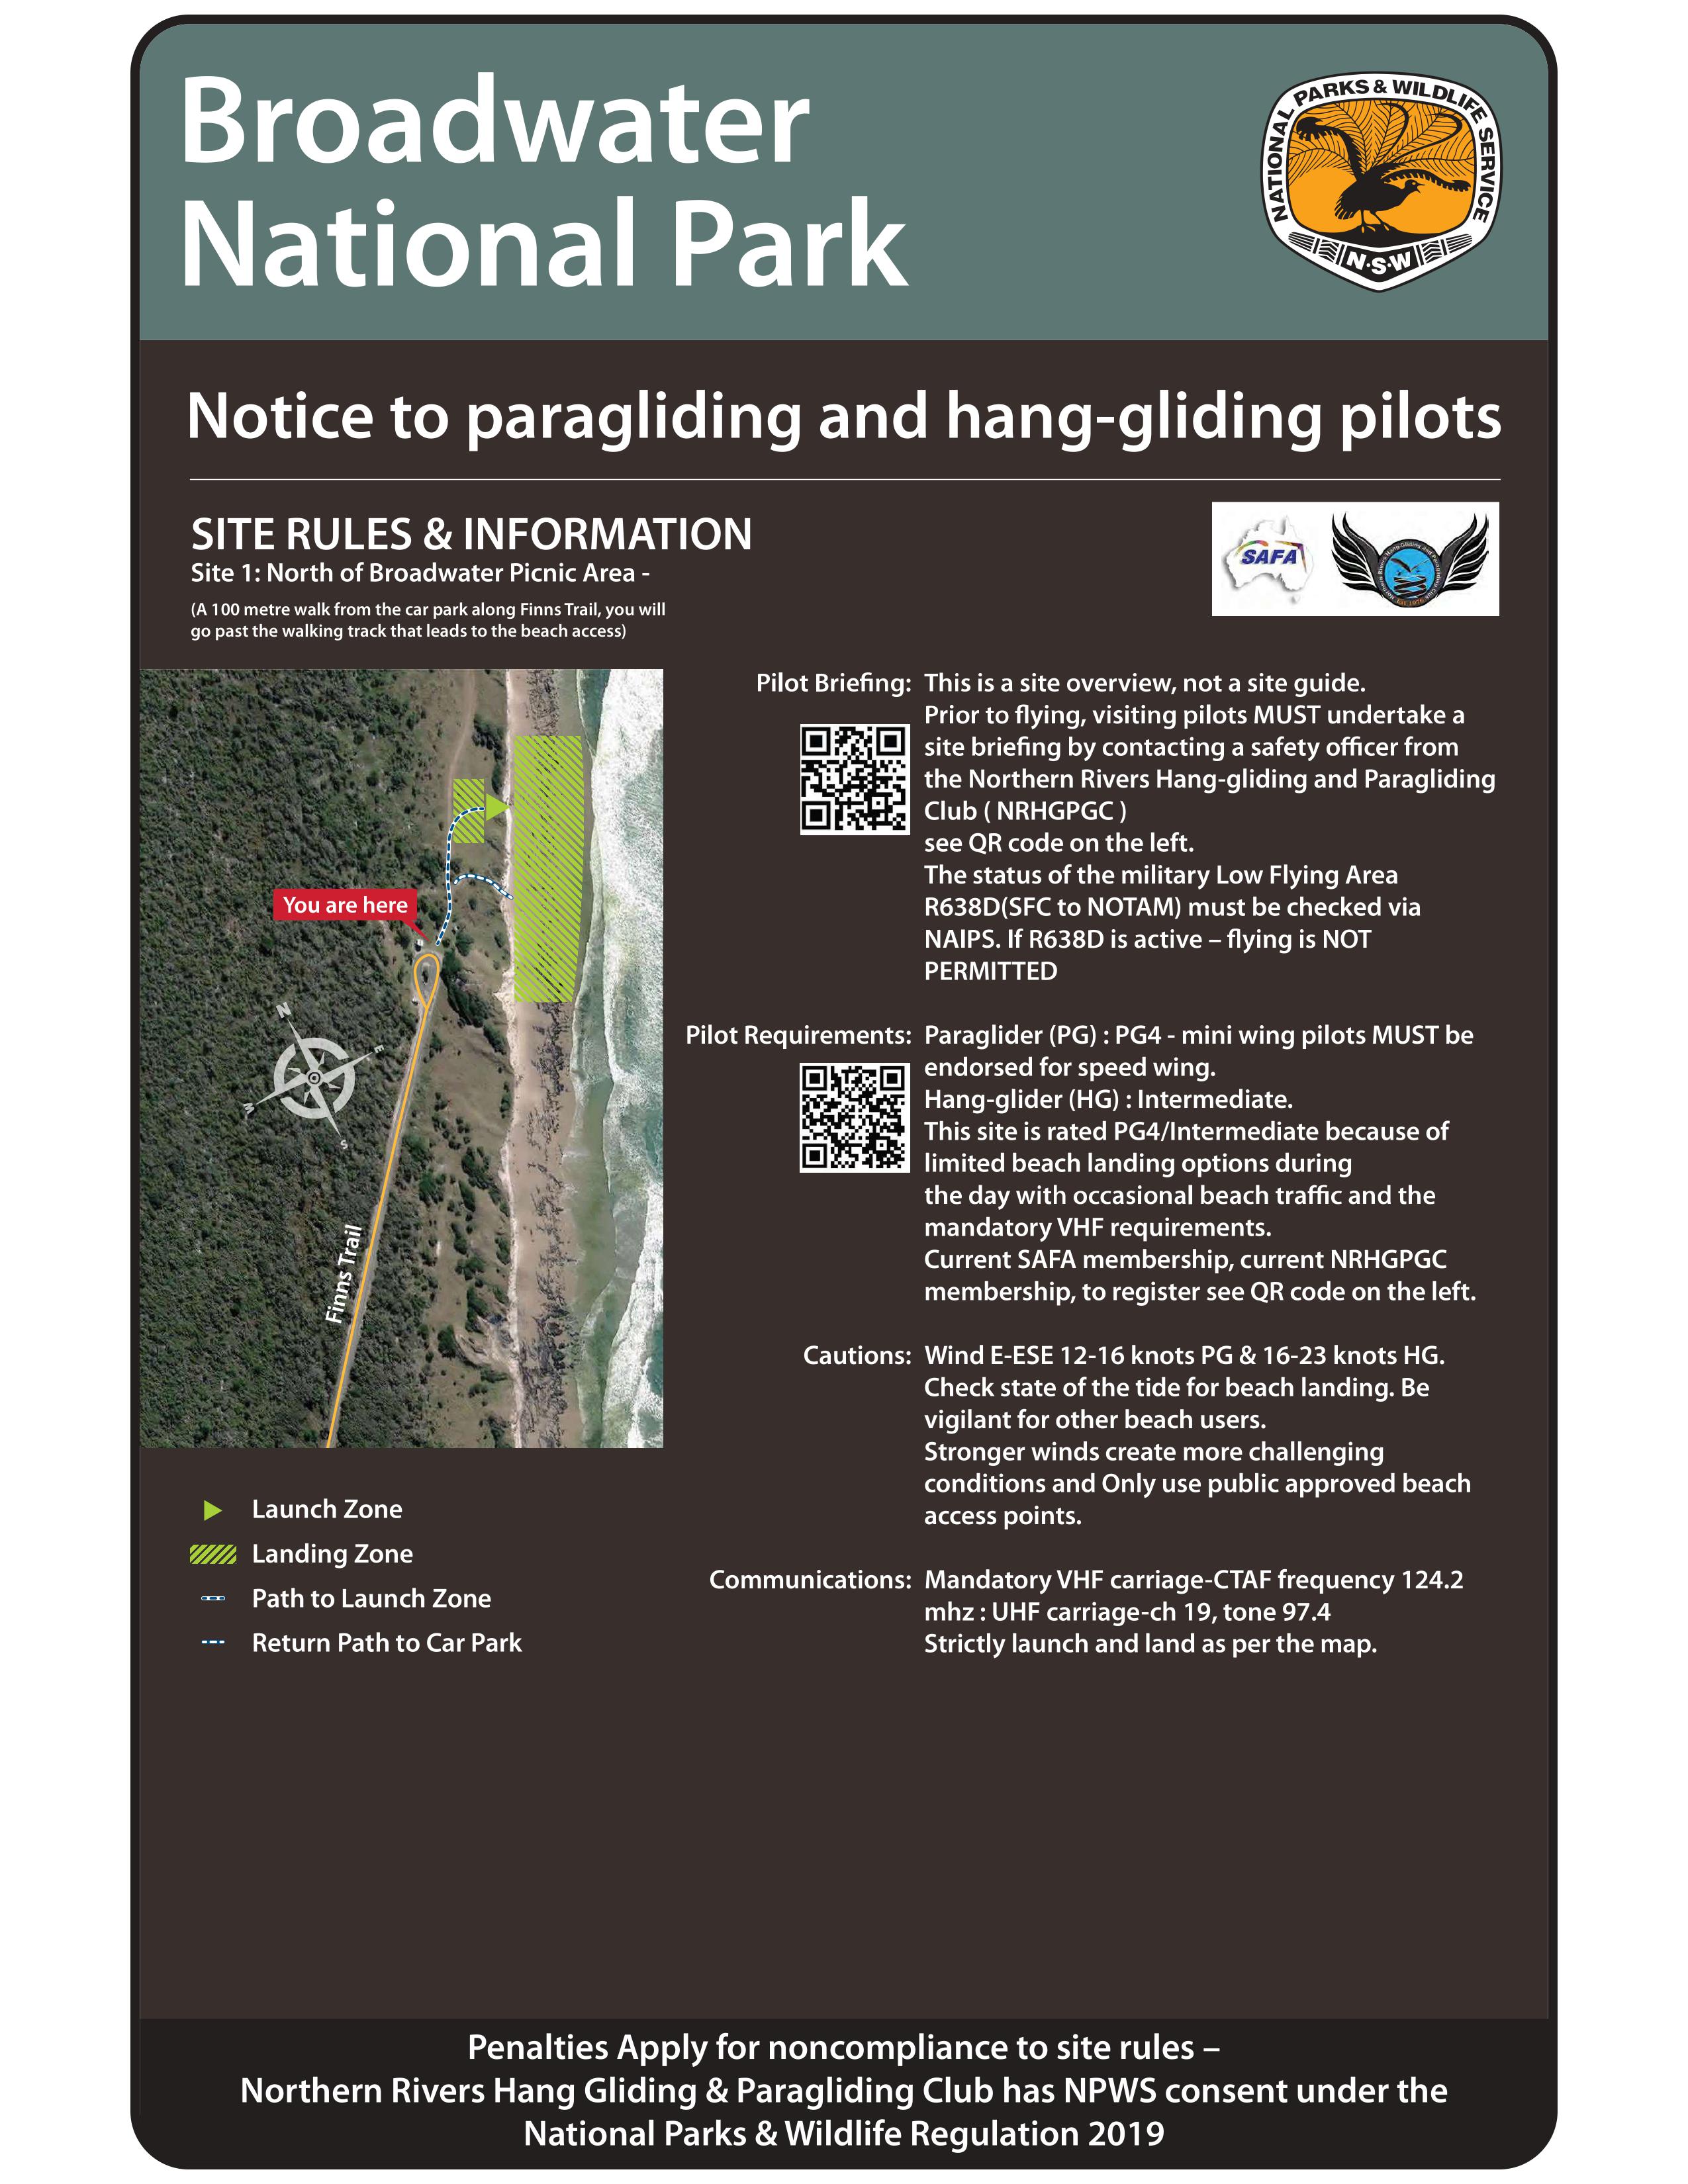 Broadwater NP Site 1 Rules and Information